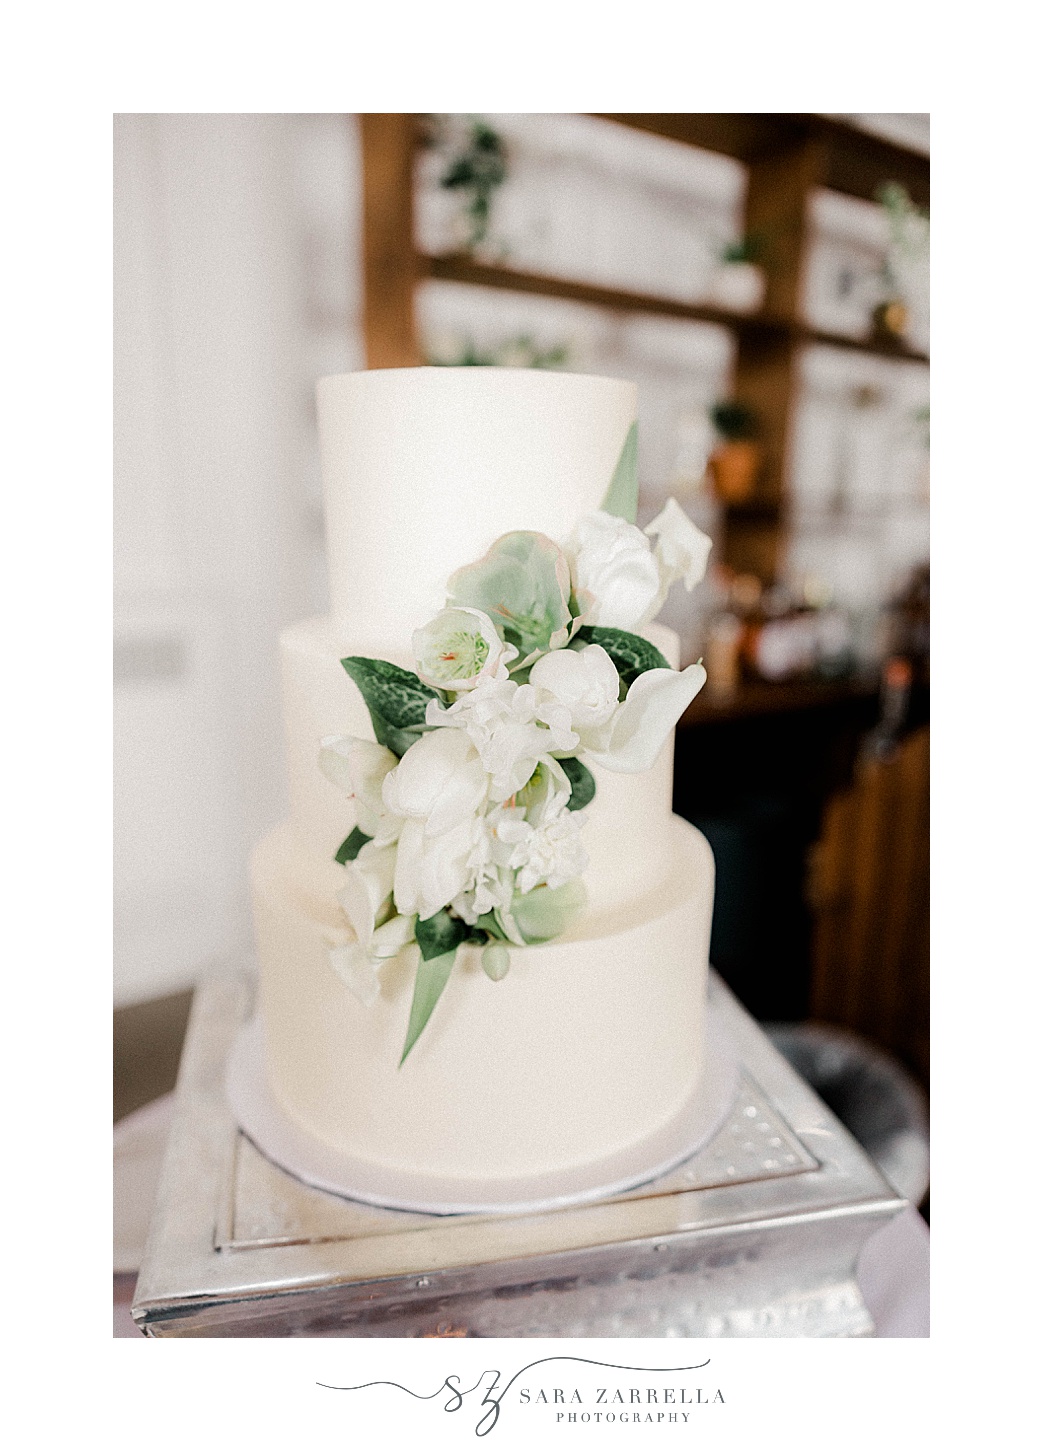 tiered wedding cake with white and green floral details 